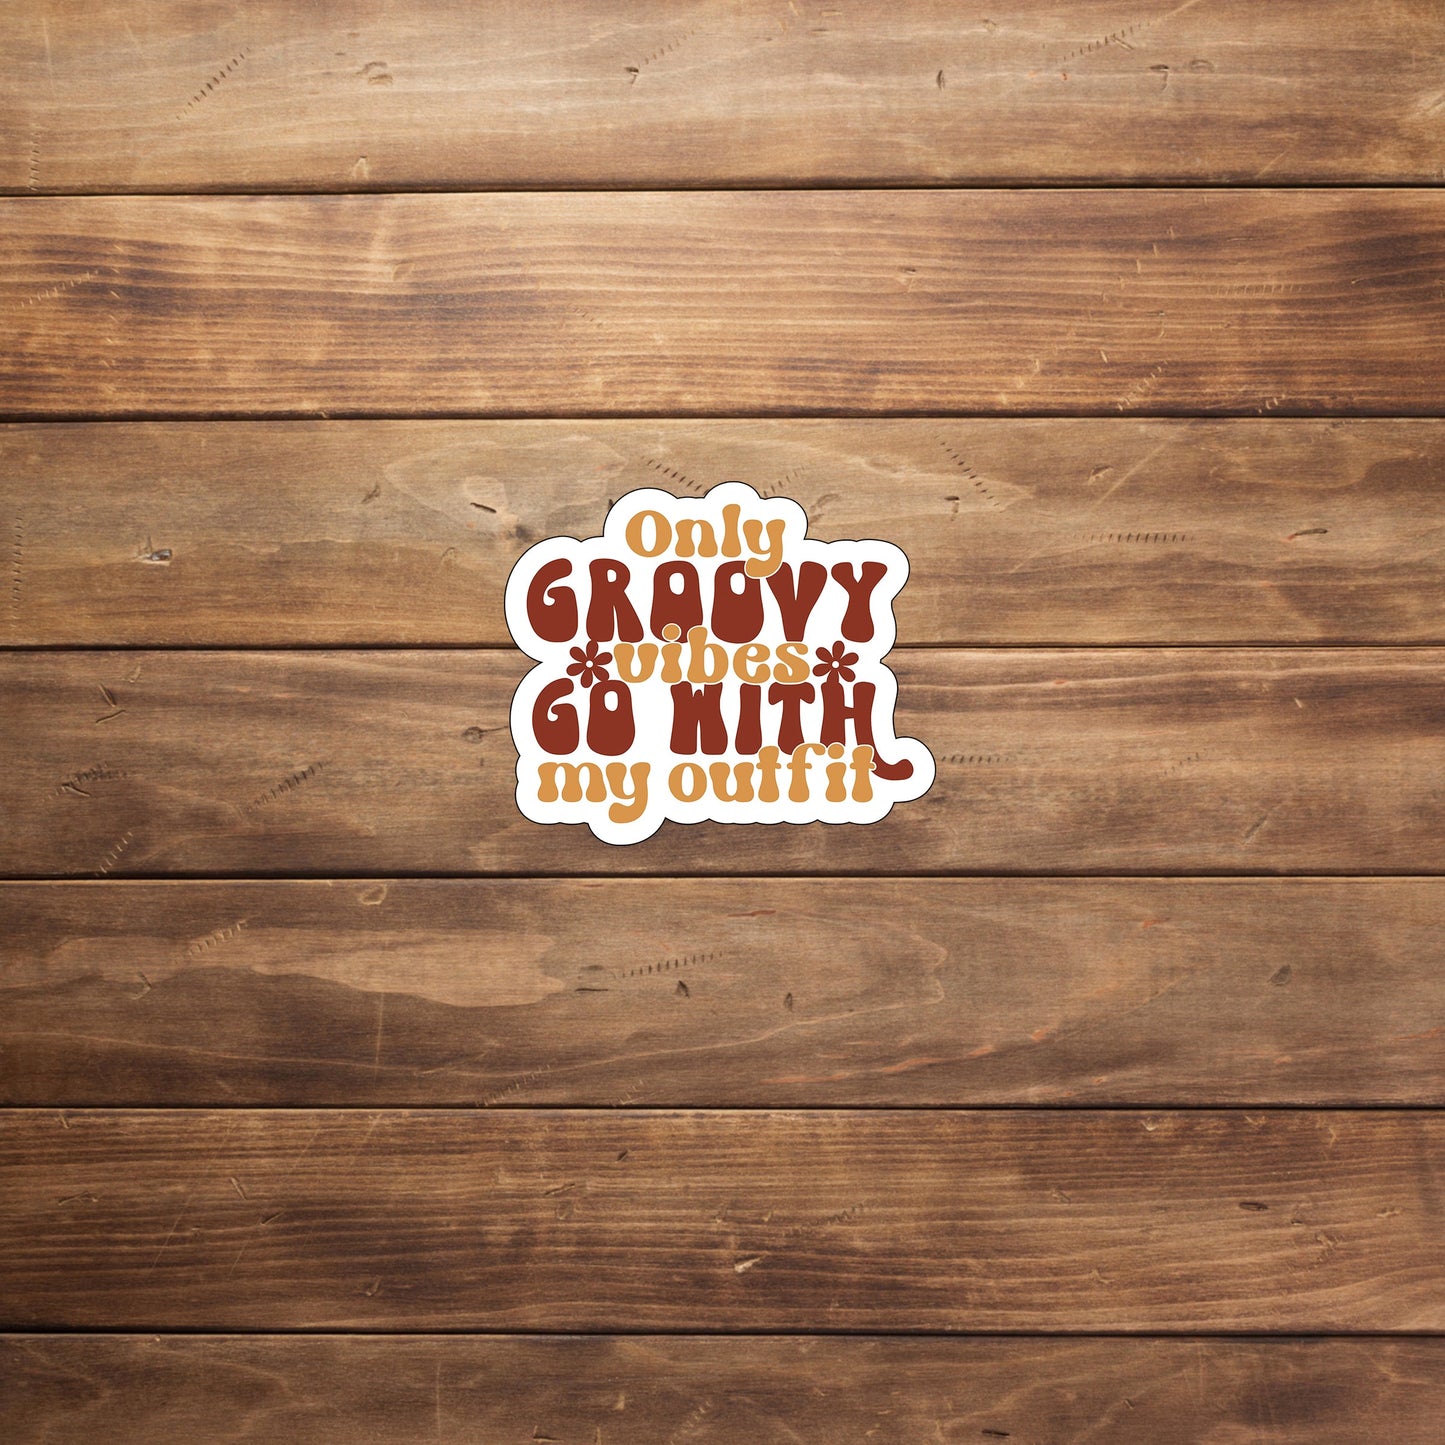 Only groovy vibes go with my outfit  Sticker,  Vinyl sticker, laptop sticker, Tablet sticker